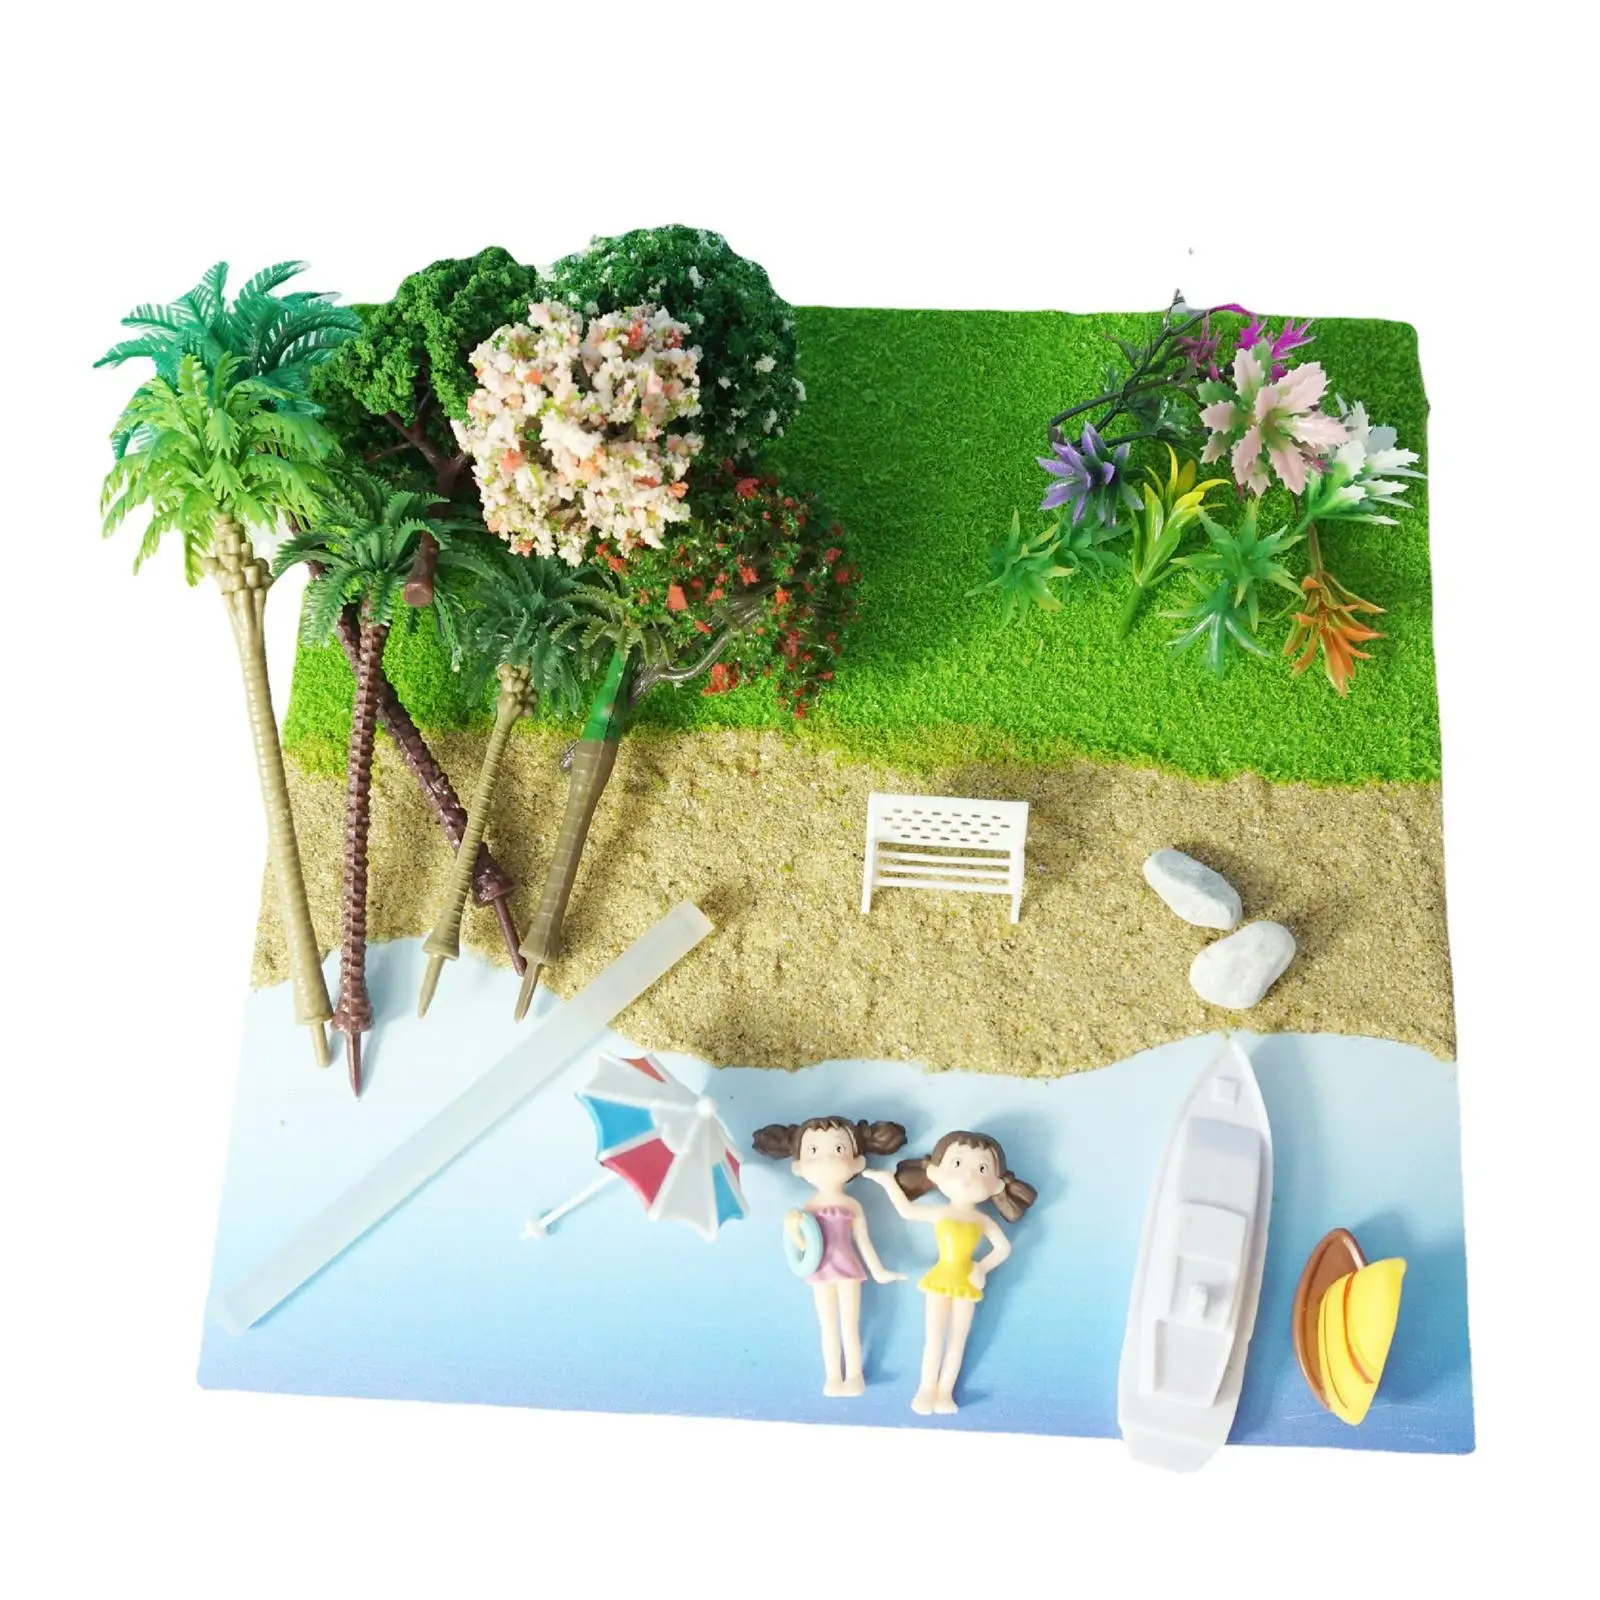 beach scenes Model Layout kits Simulation with Accessories beach scenes Model Display for Desk Hand On Ability Railroad Layouts